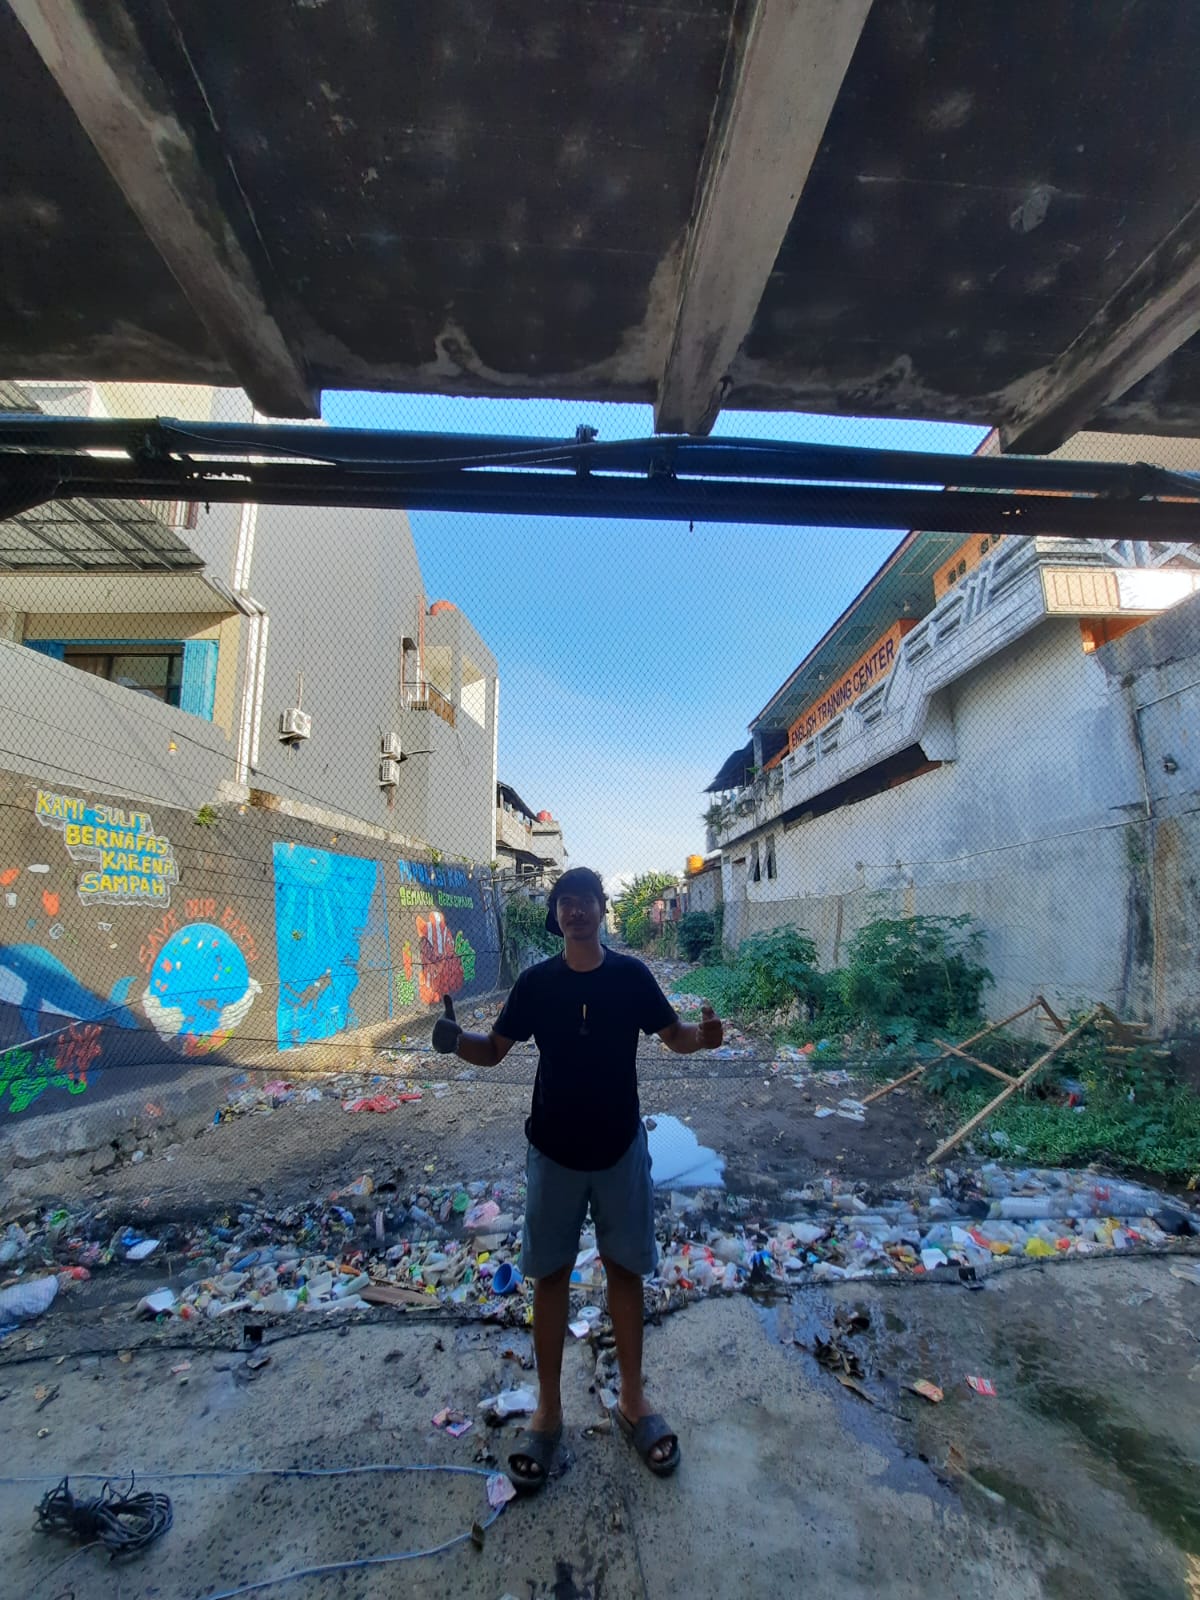 A student stands in front of netting draped under a bridge that is trapping plastic bottles and other waste near the ocean murals off to the left